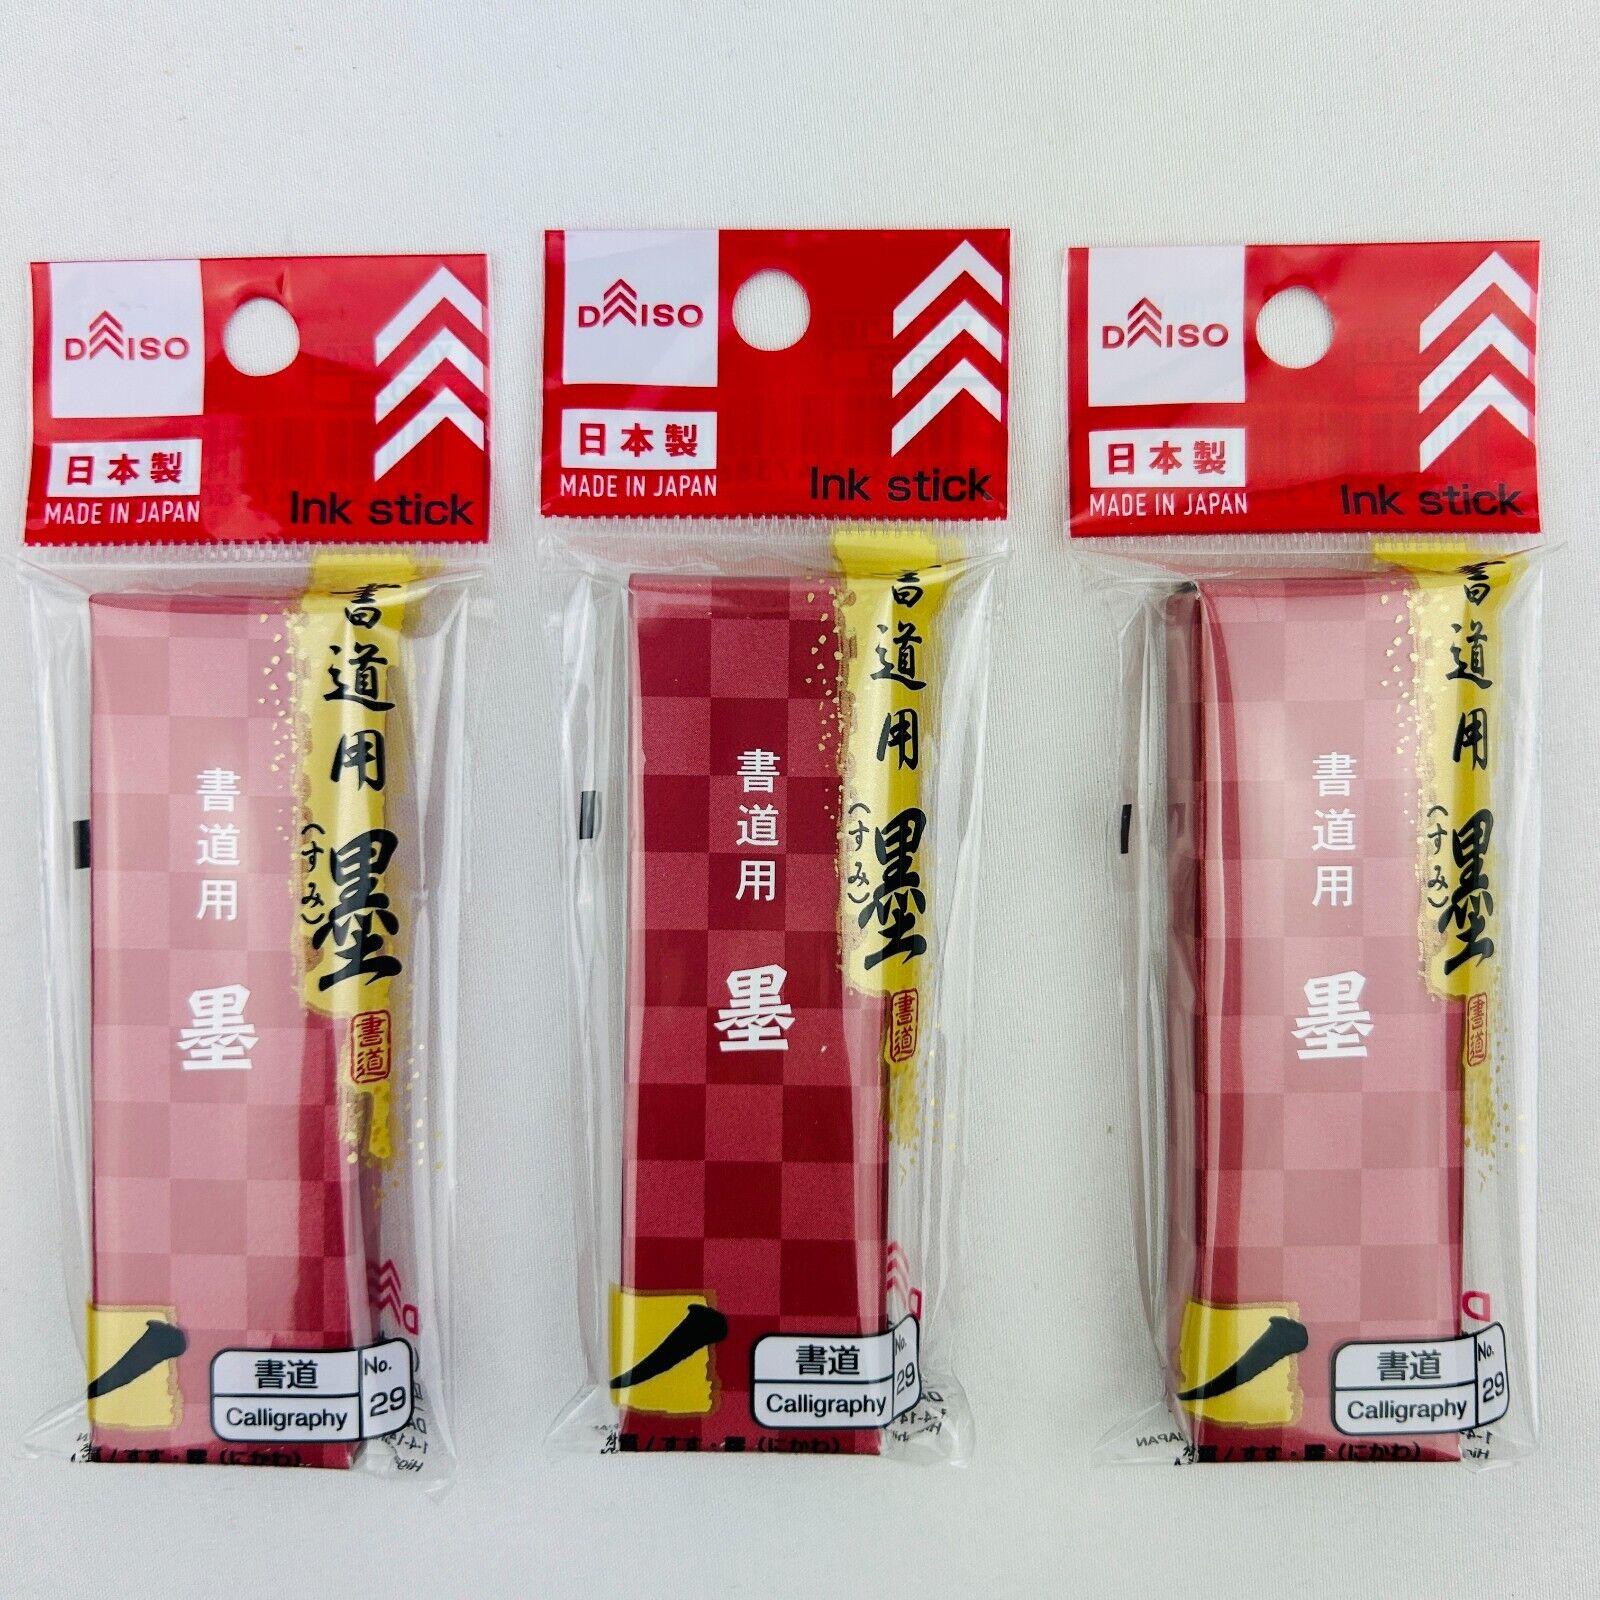 Set of 3 sumi inks Daiso Japanese Calligraphy ink sticks made in Japan